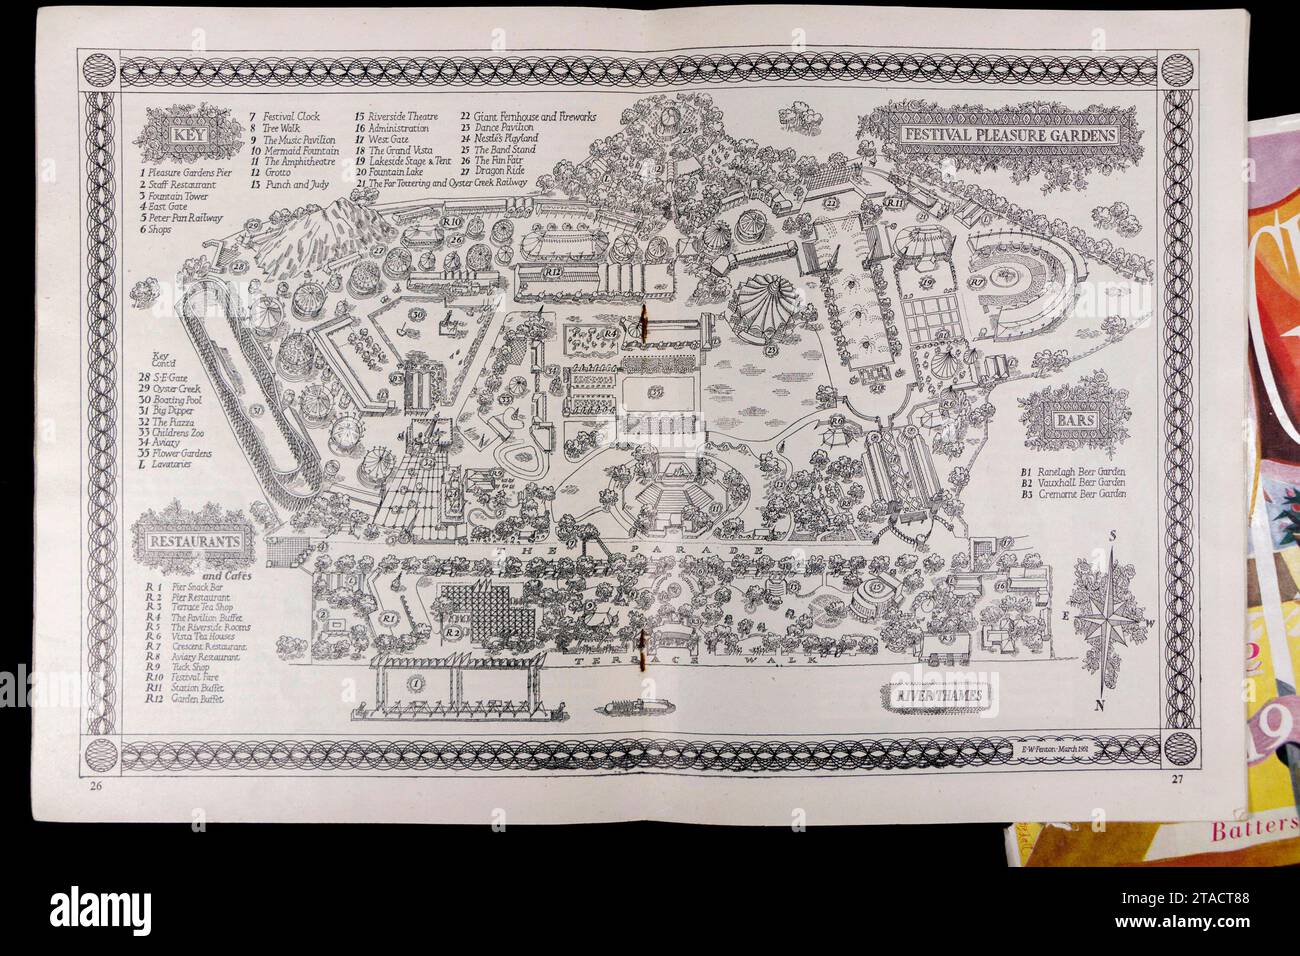 map plan of south bank site from 1951 guide to the festival of britain in london uk 1950s Stock Photo